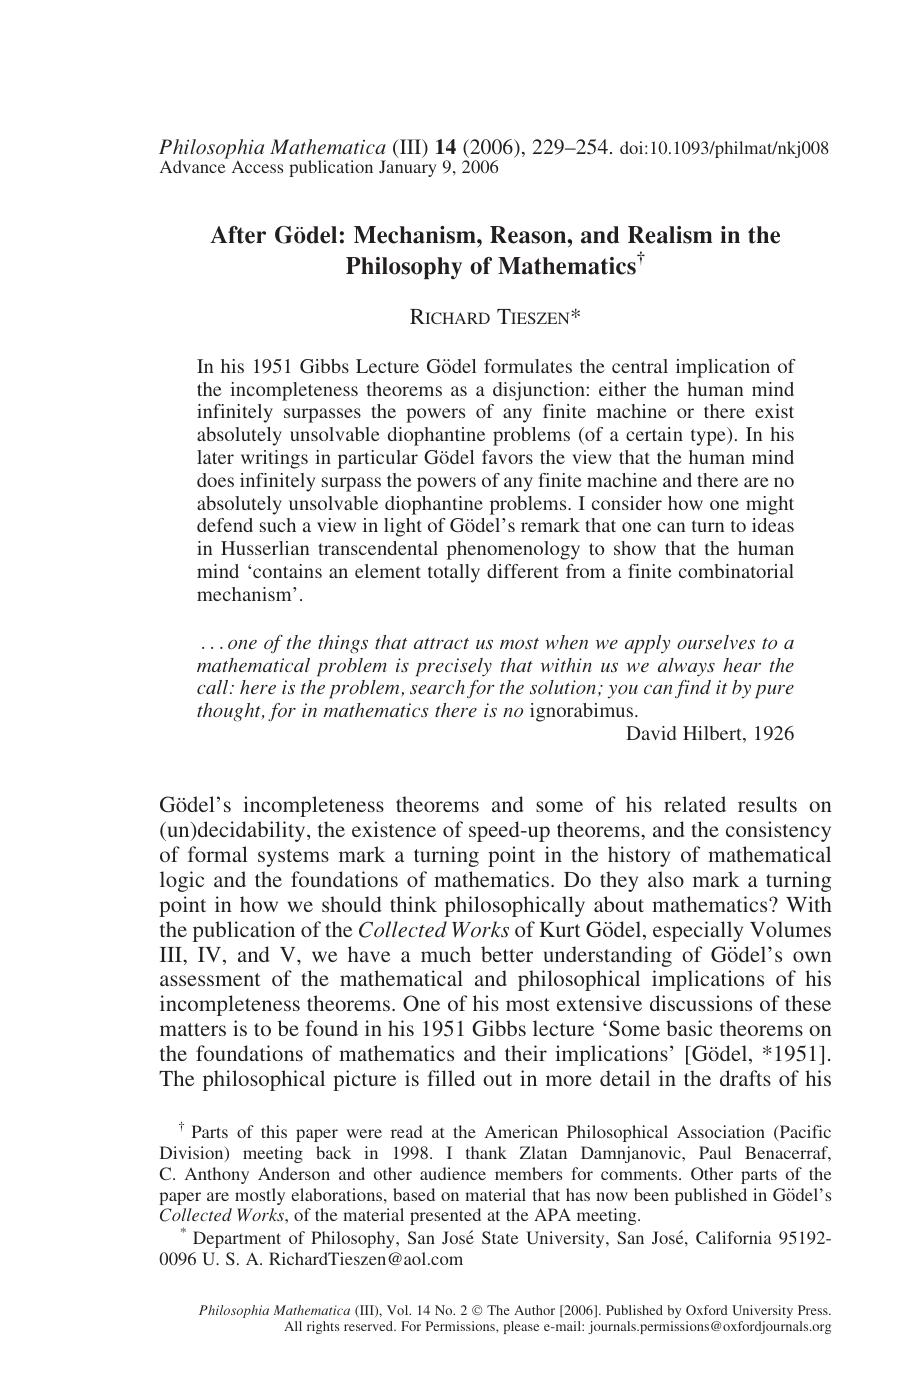 After Godel - Mechanism, Reason & Realism in the Philosophy of Mathematics - Article